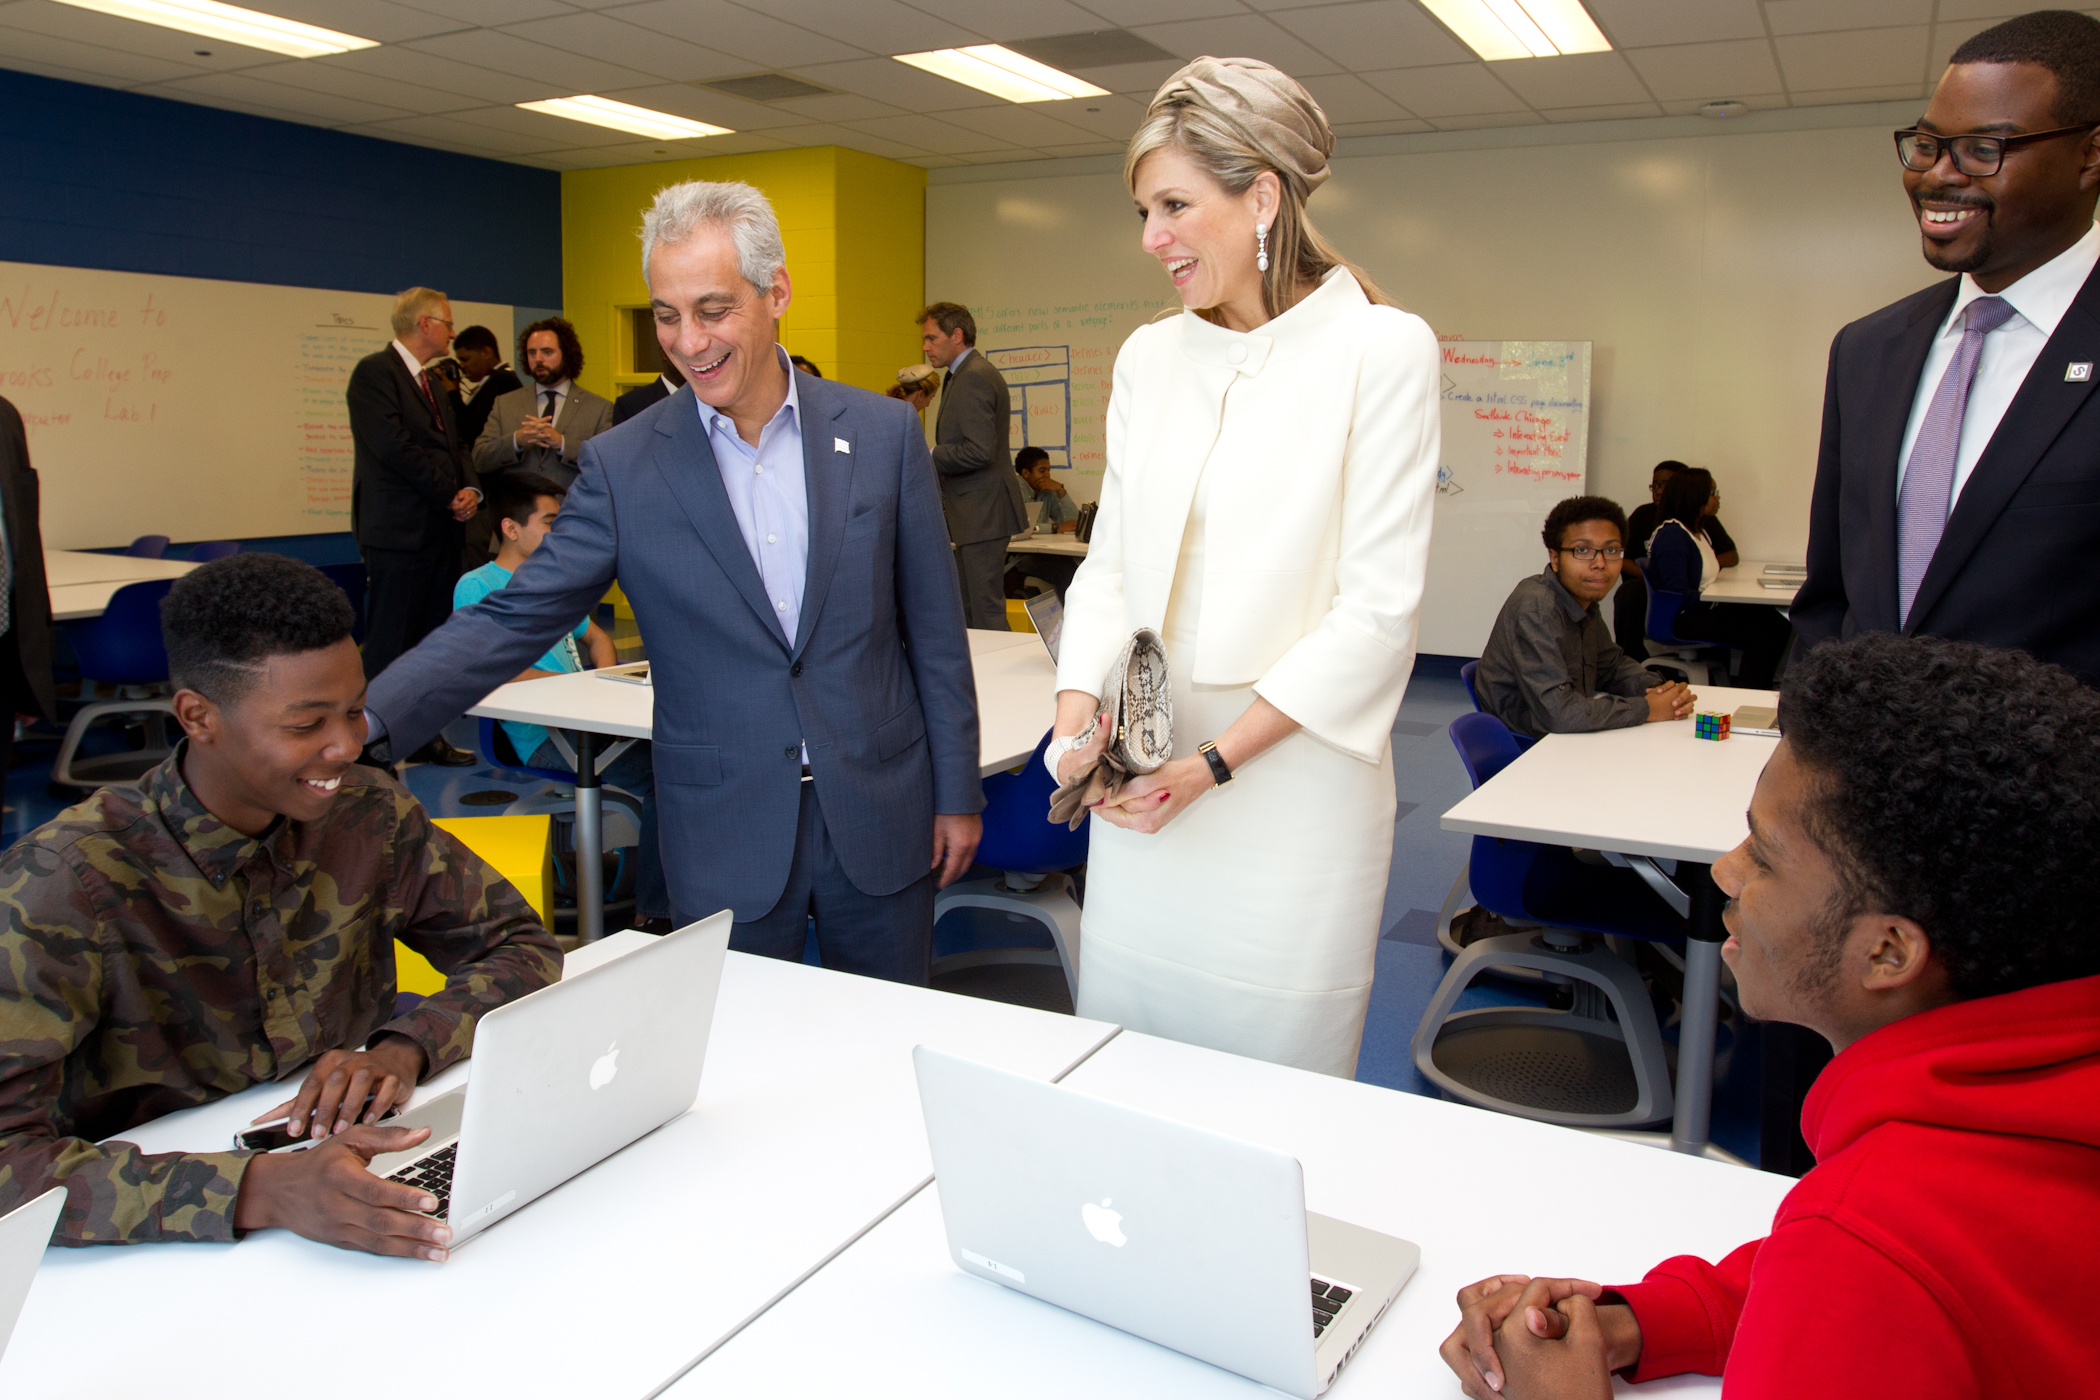 Mayor Emanuel joins their Majesties King Willem-Alexander and Queen Máxima of the Netherlands taking part in an interactive tour of Gwendolyn Brooks College Preparatory Academy.